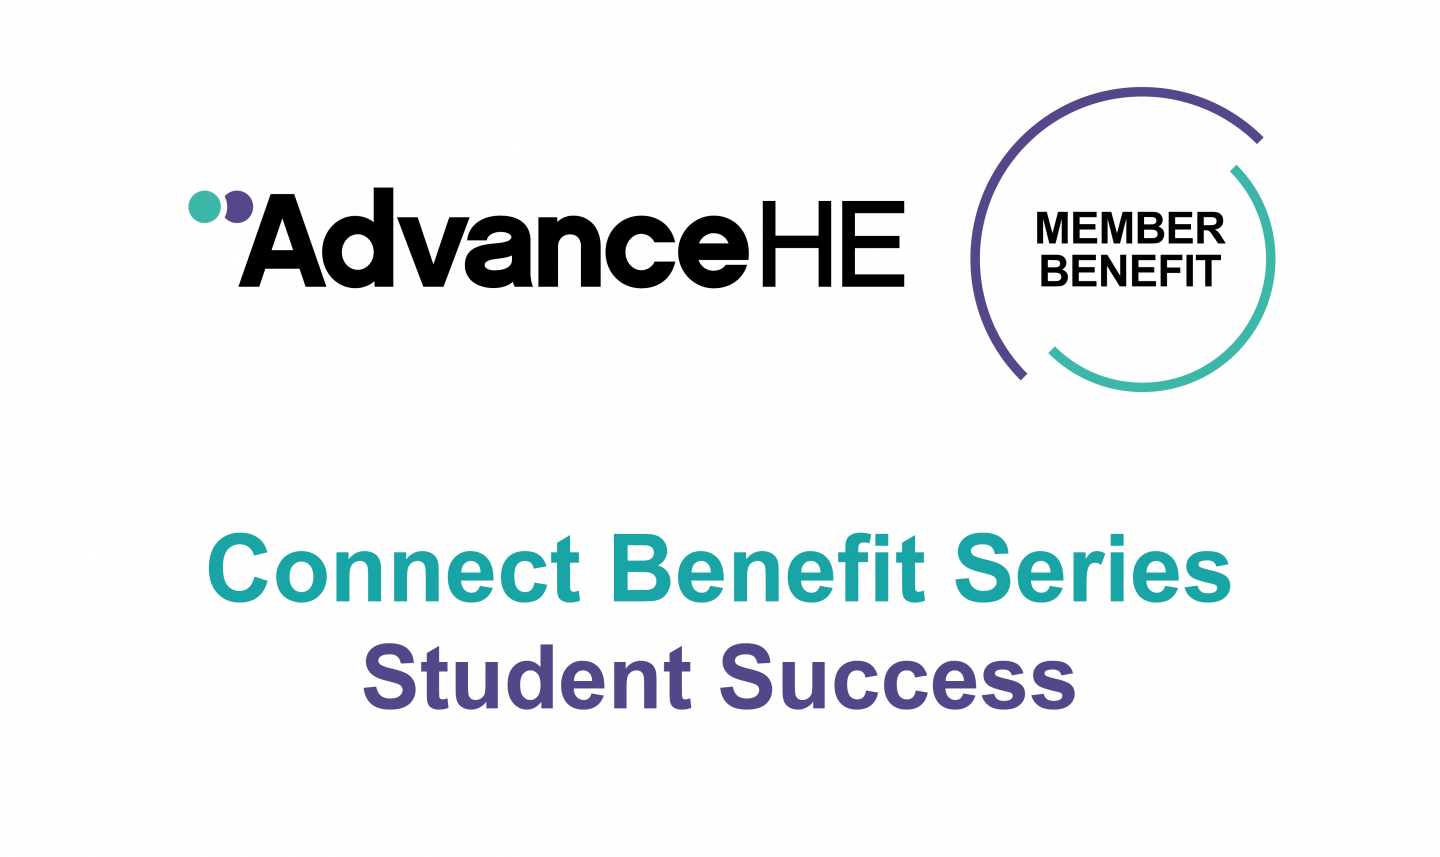 Image of Connect Benefit Series Student Success